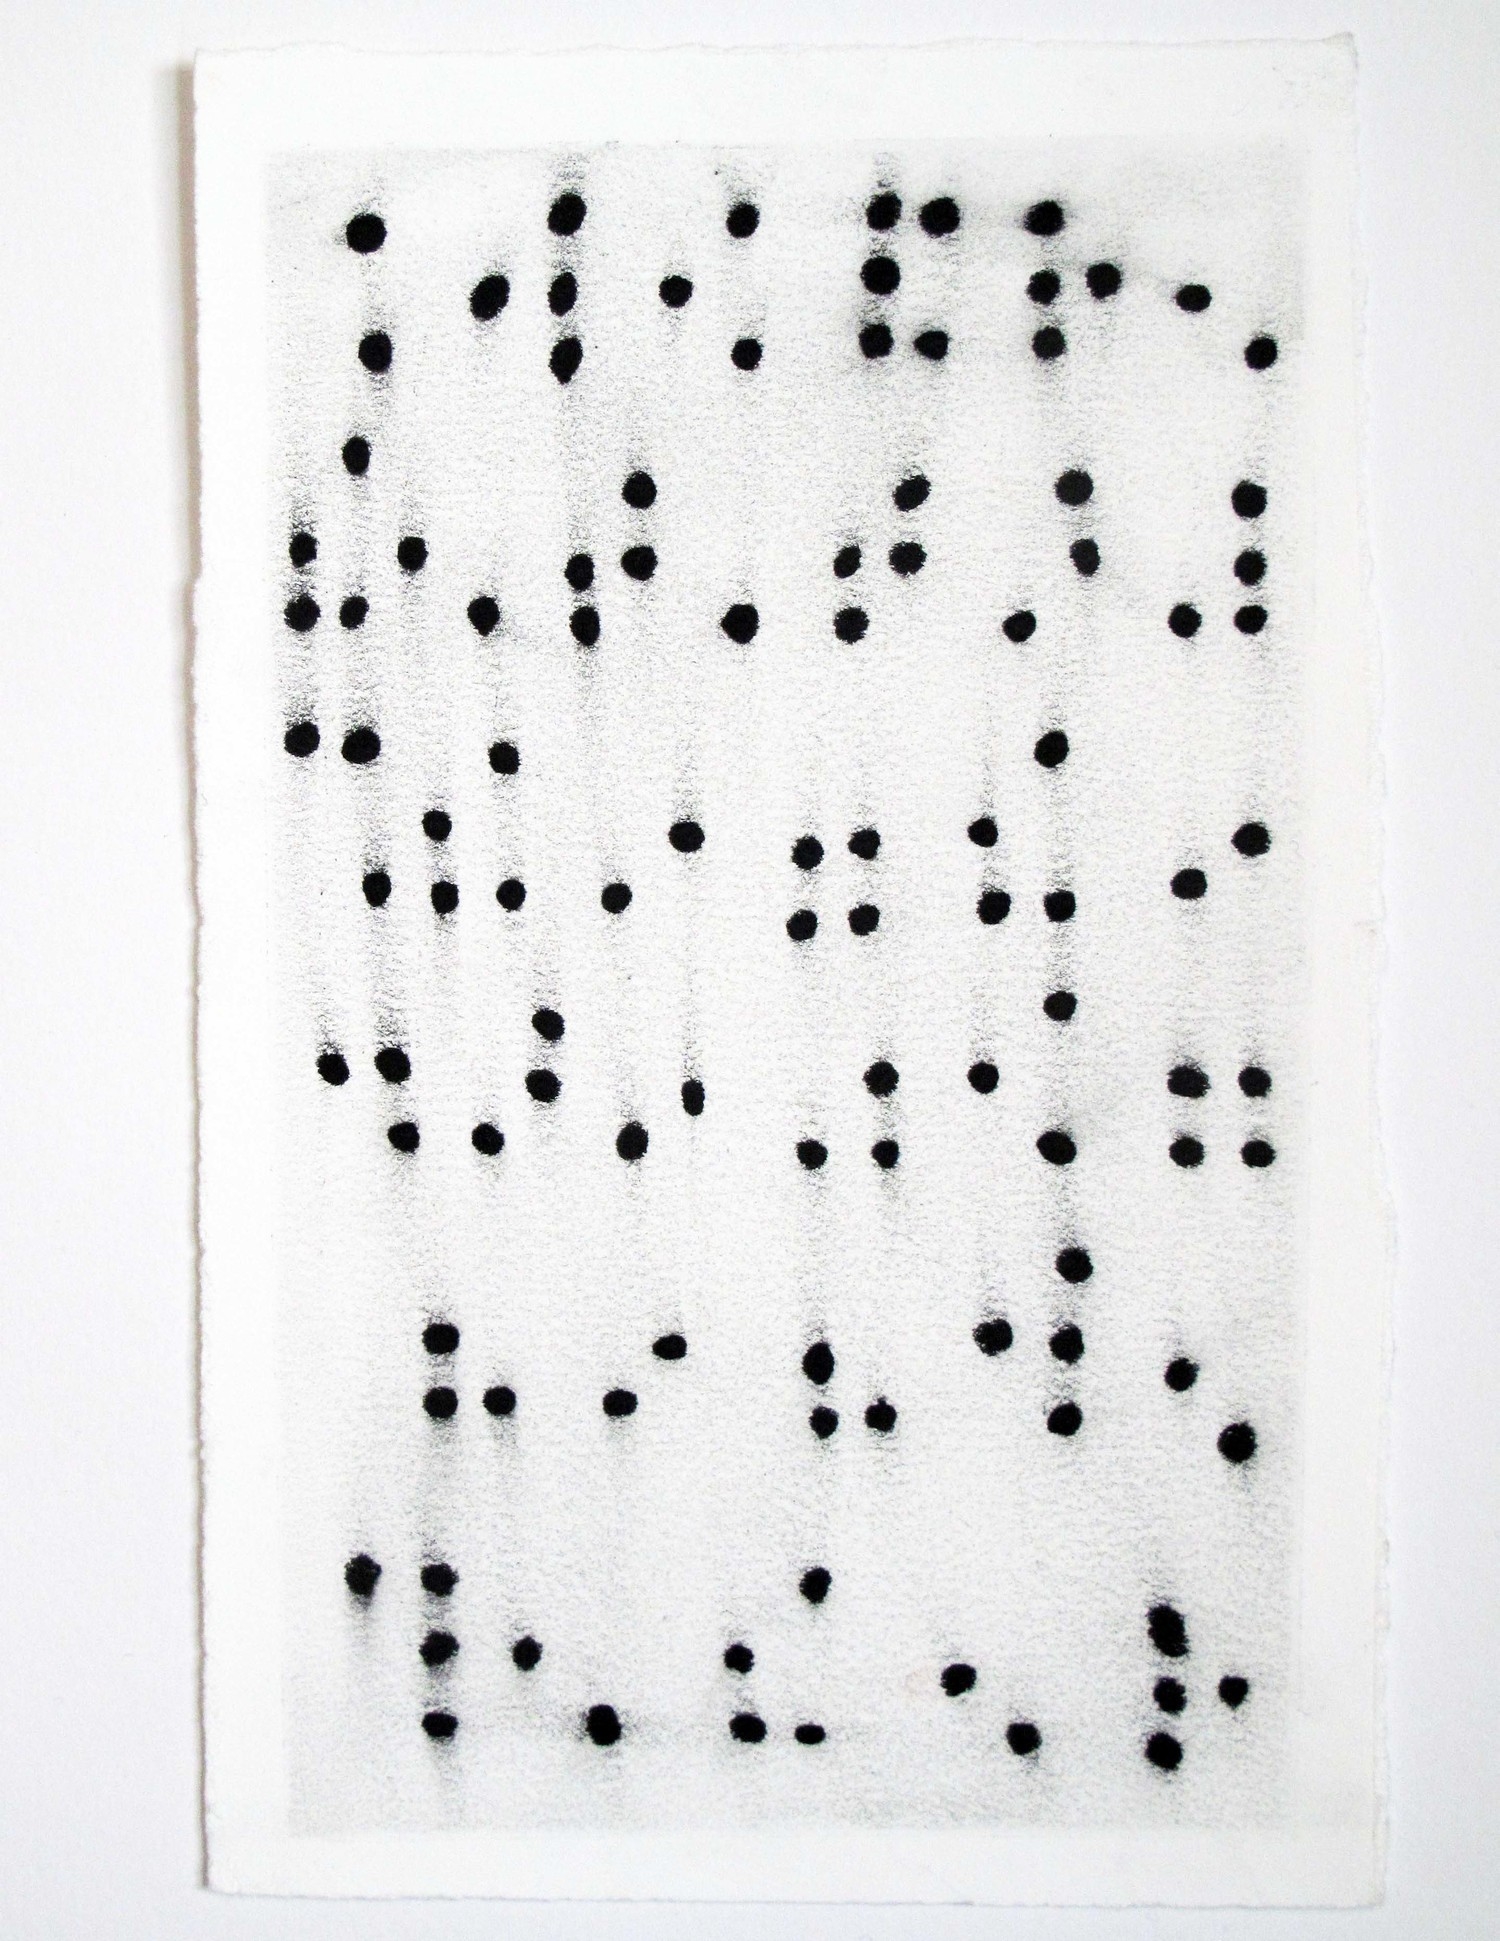 AUTHOR'S NOTE: A COLLECTION OF EIGHTEEN 6 x 8 INCH DRAWINGS. CHARCOAL ON PAPER (MORSE CODE, BRAILLE, SCRABBLE TILE SCORING HASH MARKS), 2014 